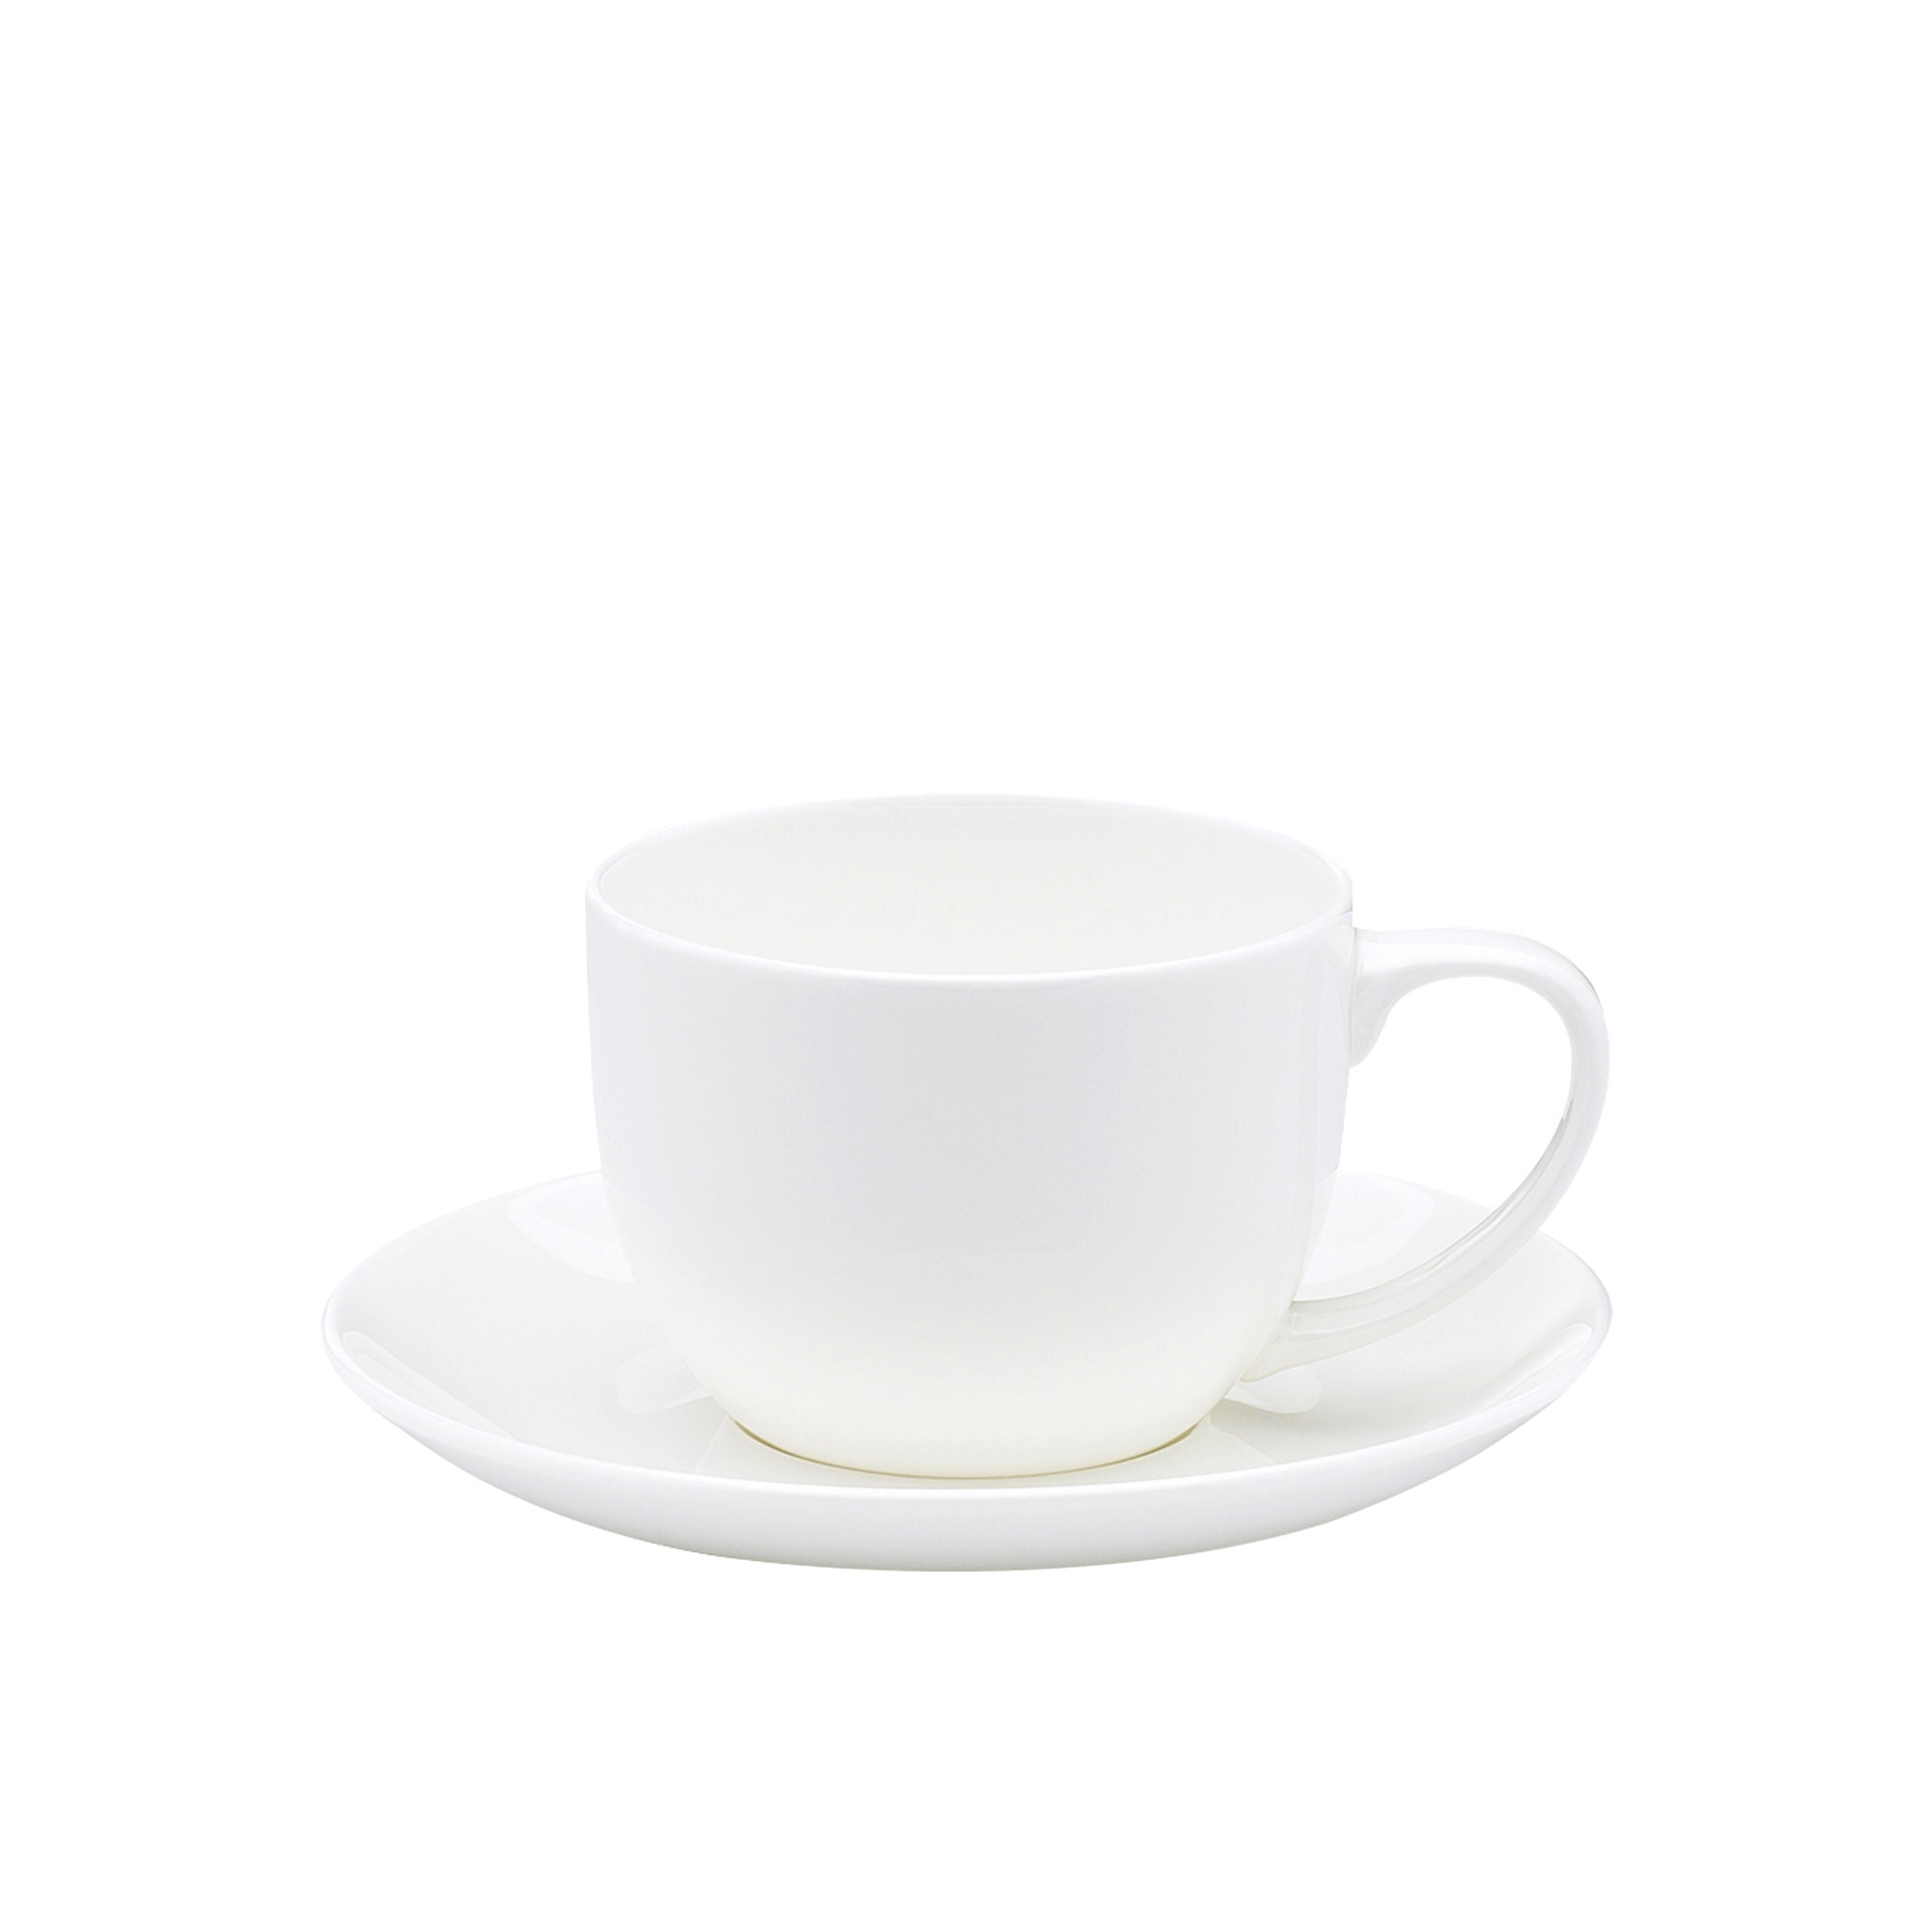 Ecology Canvas Teacup & Saucer 275ml White Image 1